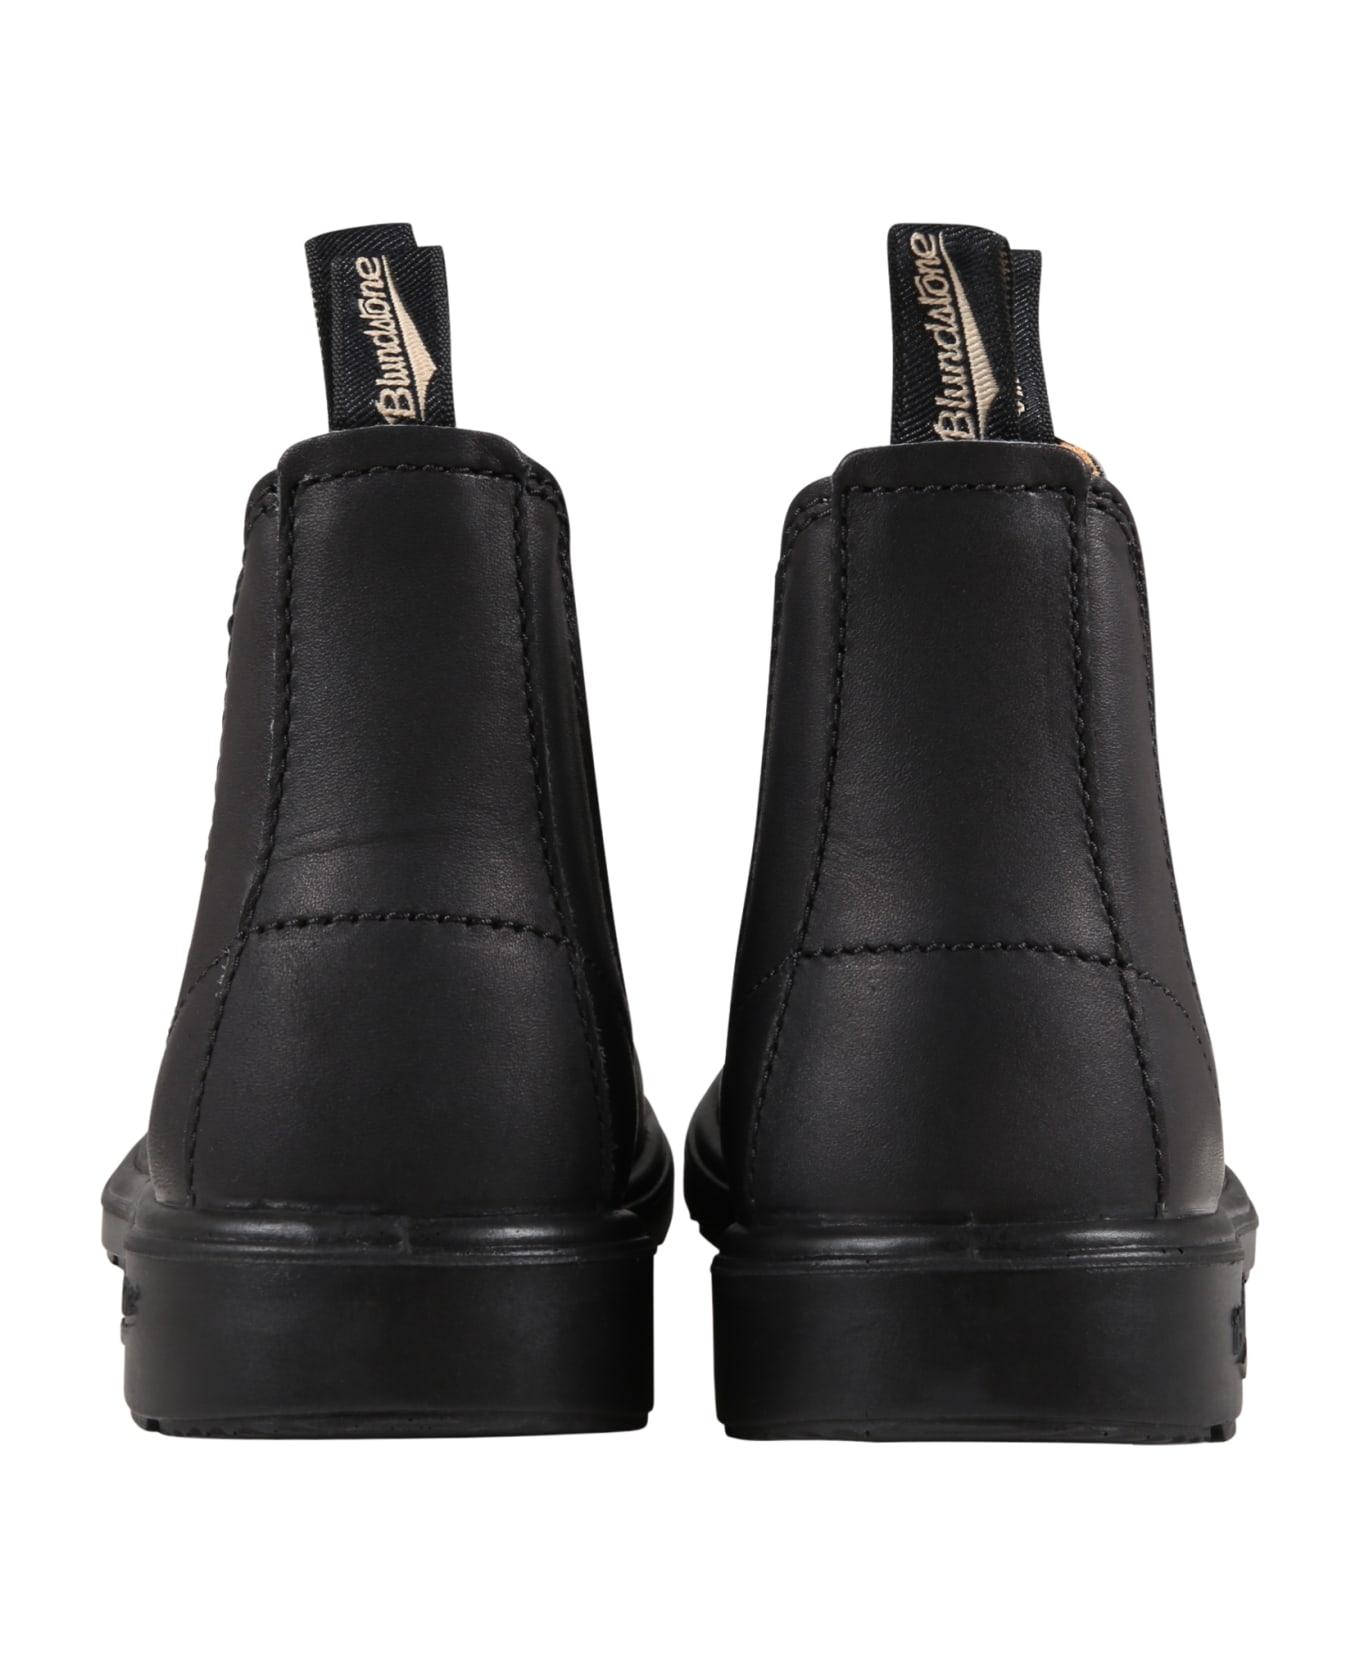 Blundstone Black Boots For Boy With Logo - Black